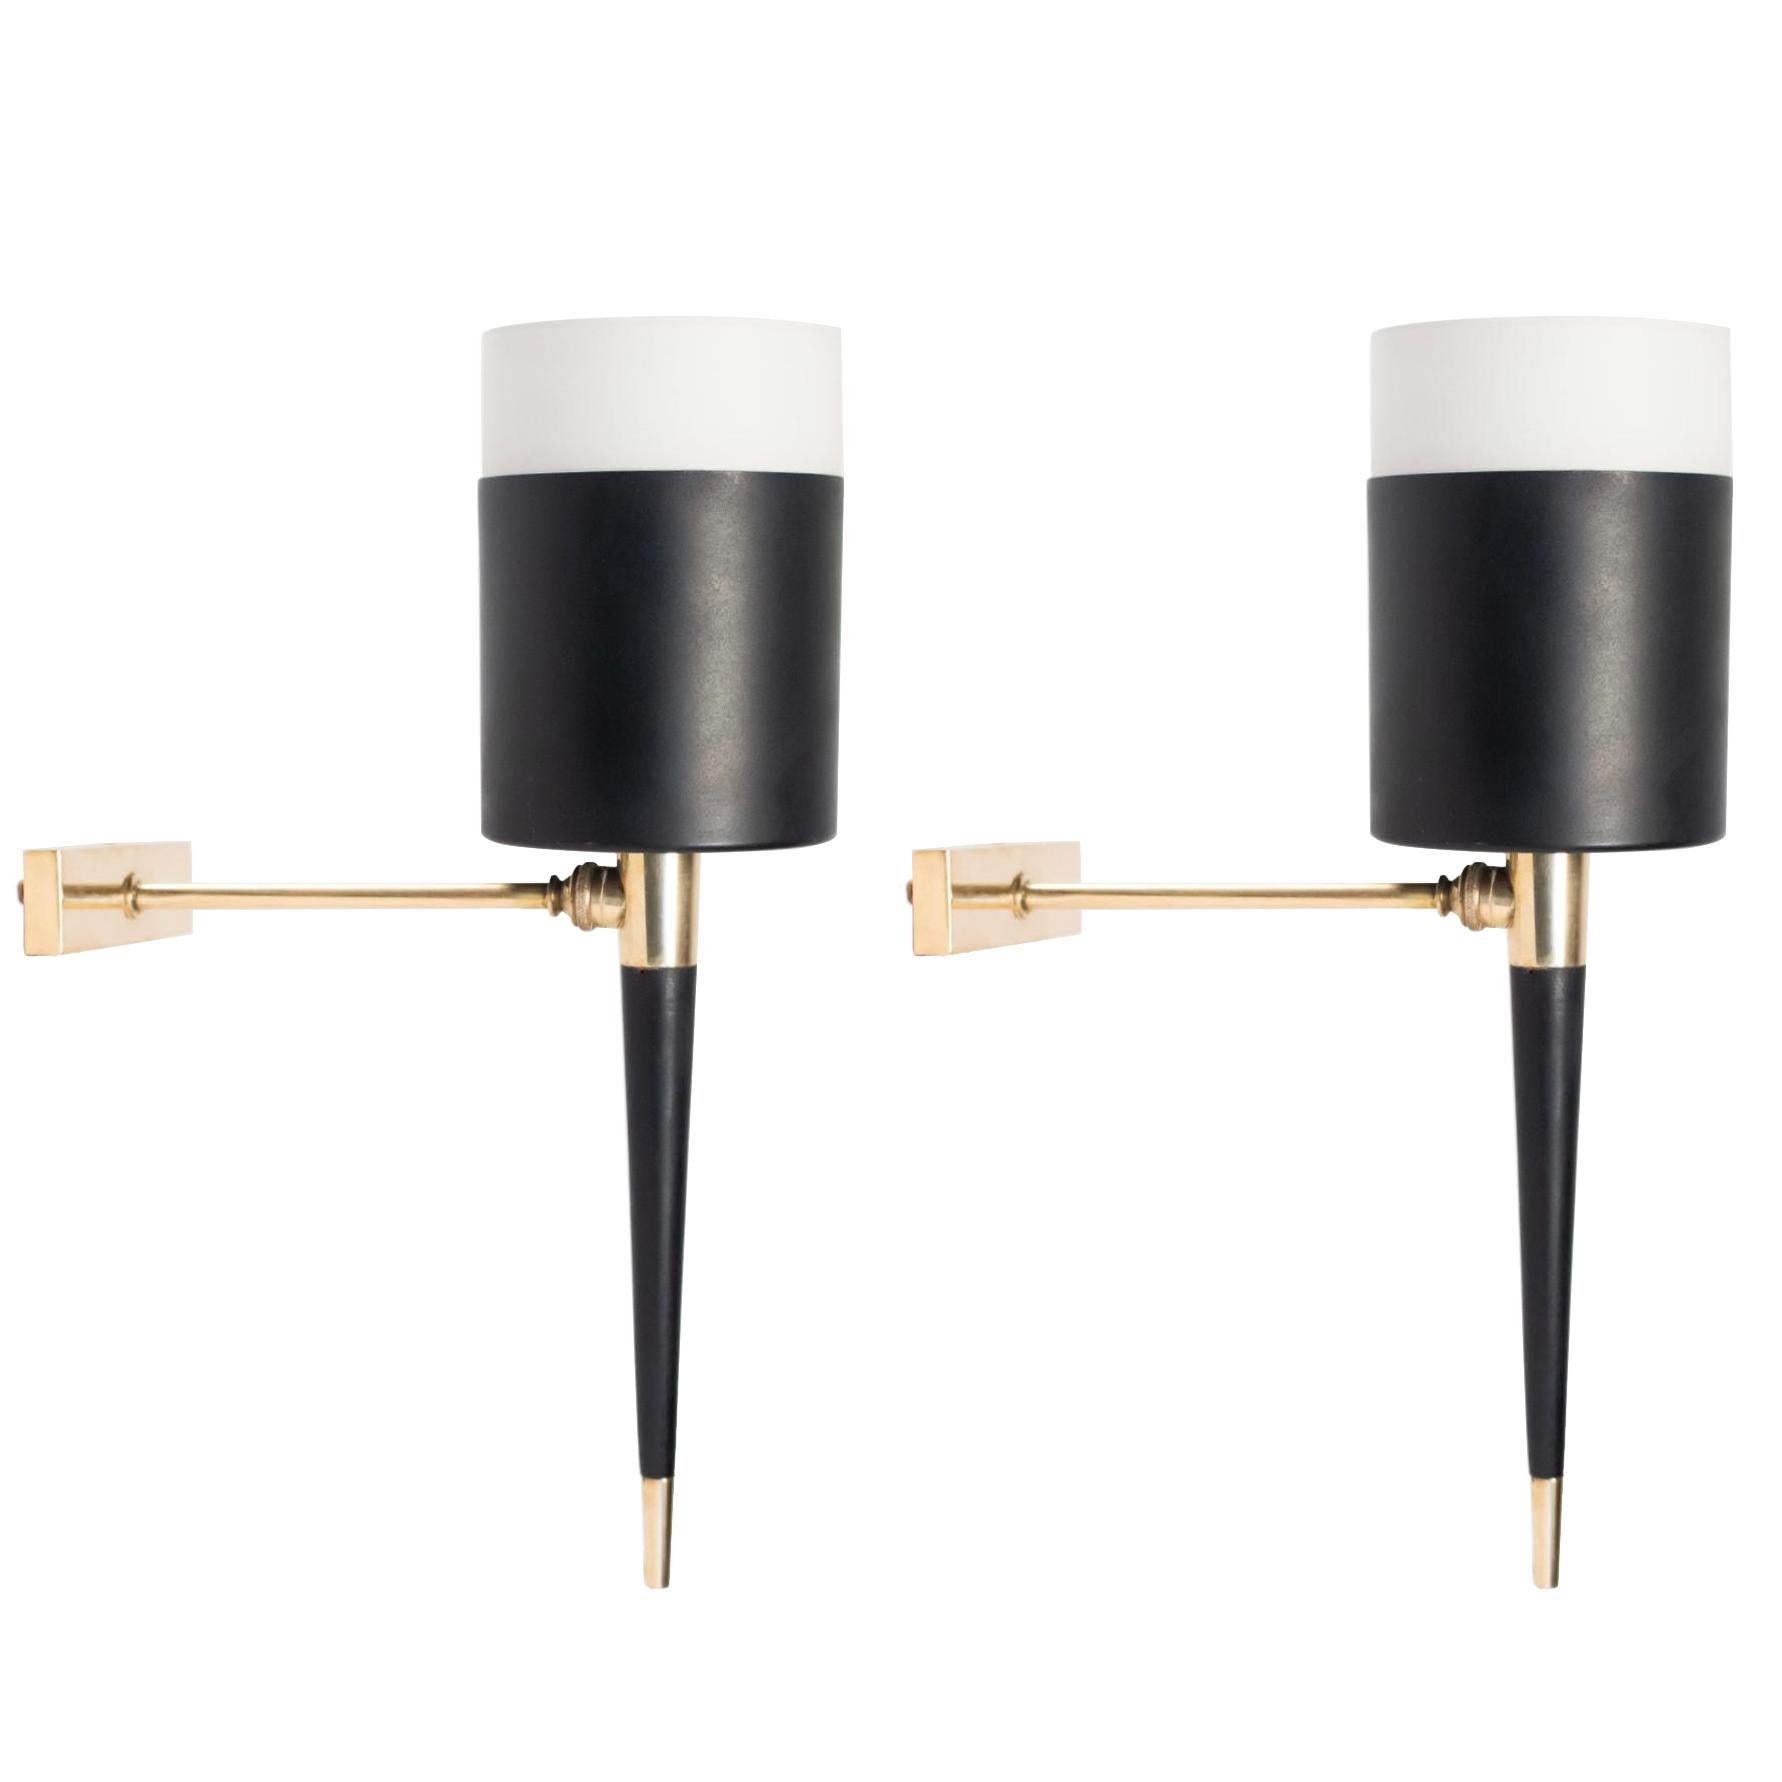 Shaped in torch with a brass back plate and a brass arm.
The stem is made of black lacquered wood with a brass spike.
The diffusor consist cylindrical metal cup blackened with white glass satin shade.

One bulb per sconce.
Four sconces